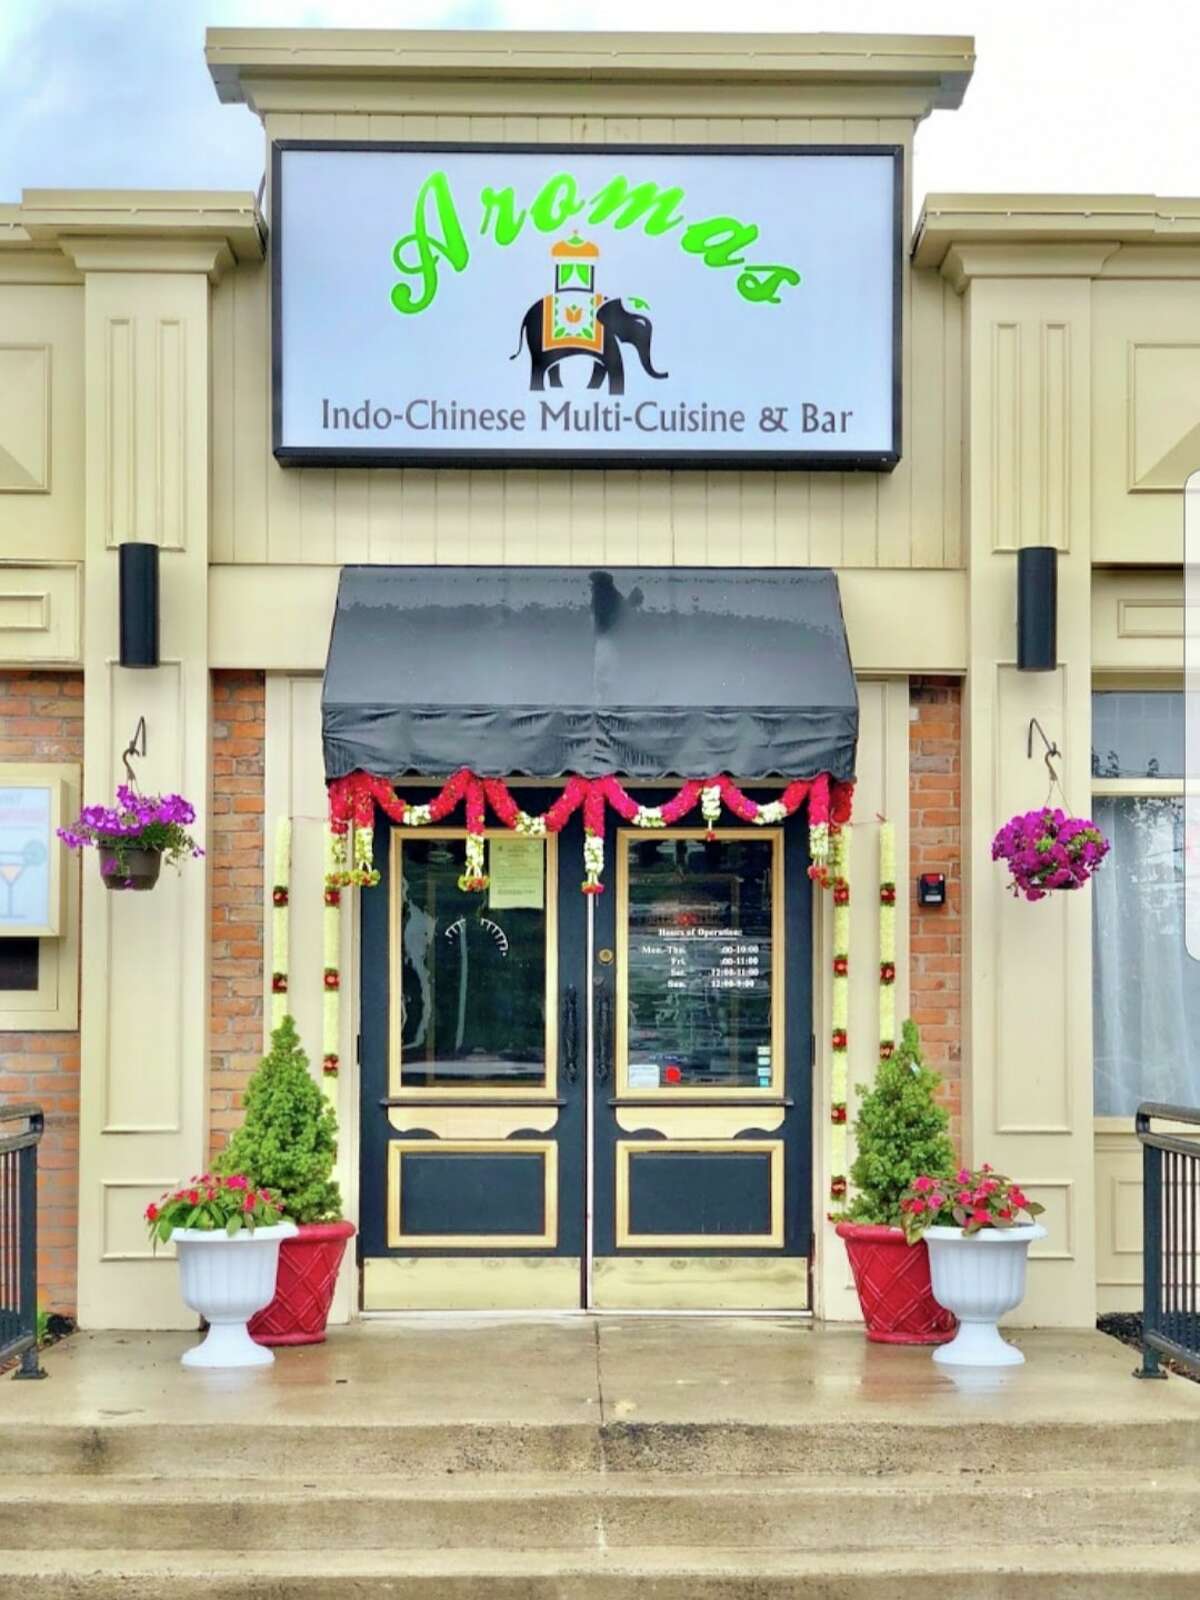 Aromas Indo-Chinese Multi-Cuisine & Bar at 1614 Central Ave. in Colonie.